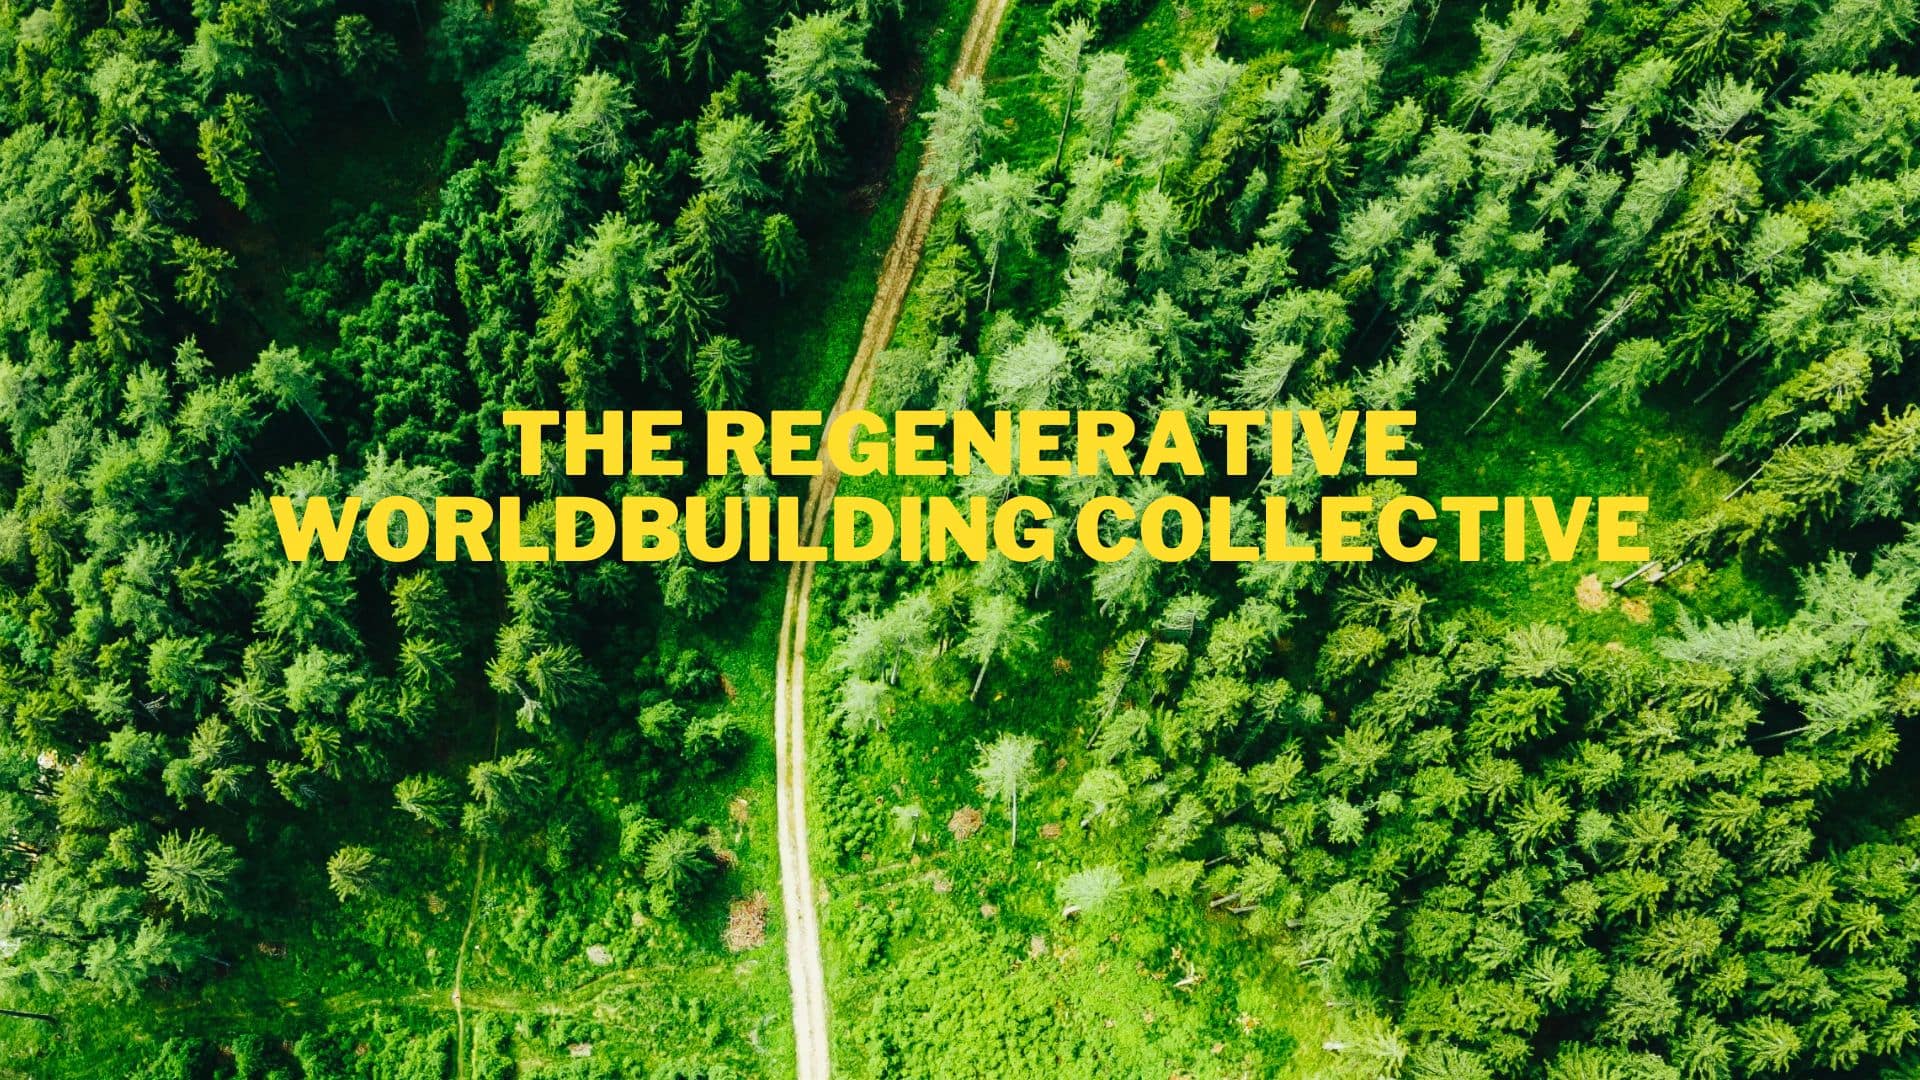 Syllble Launches The Regenerative Worldbuilding Collective to Reshape Future Narratives through Science Fiction